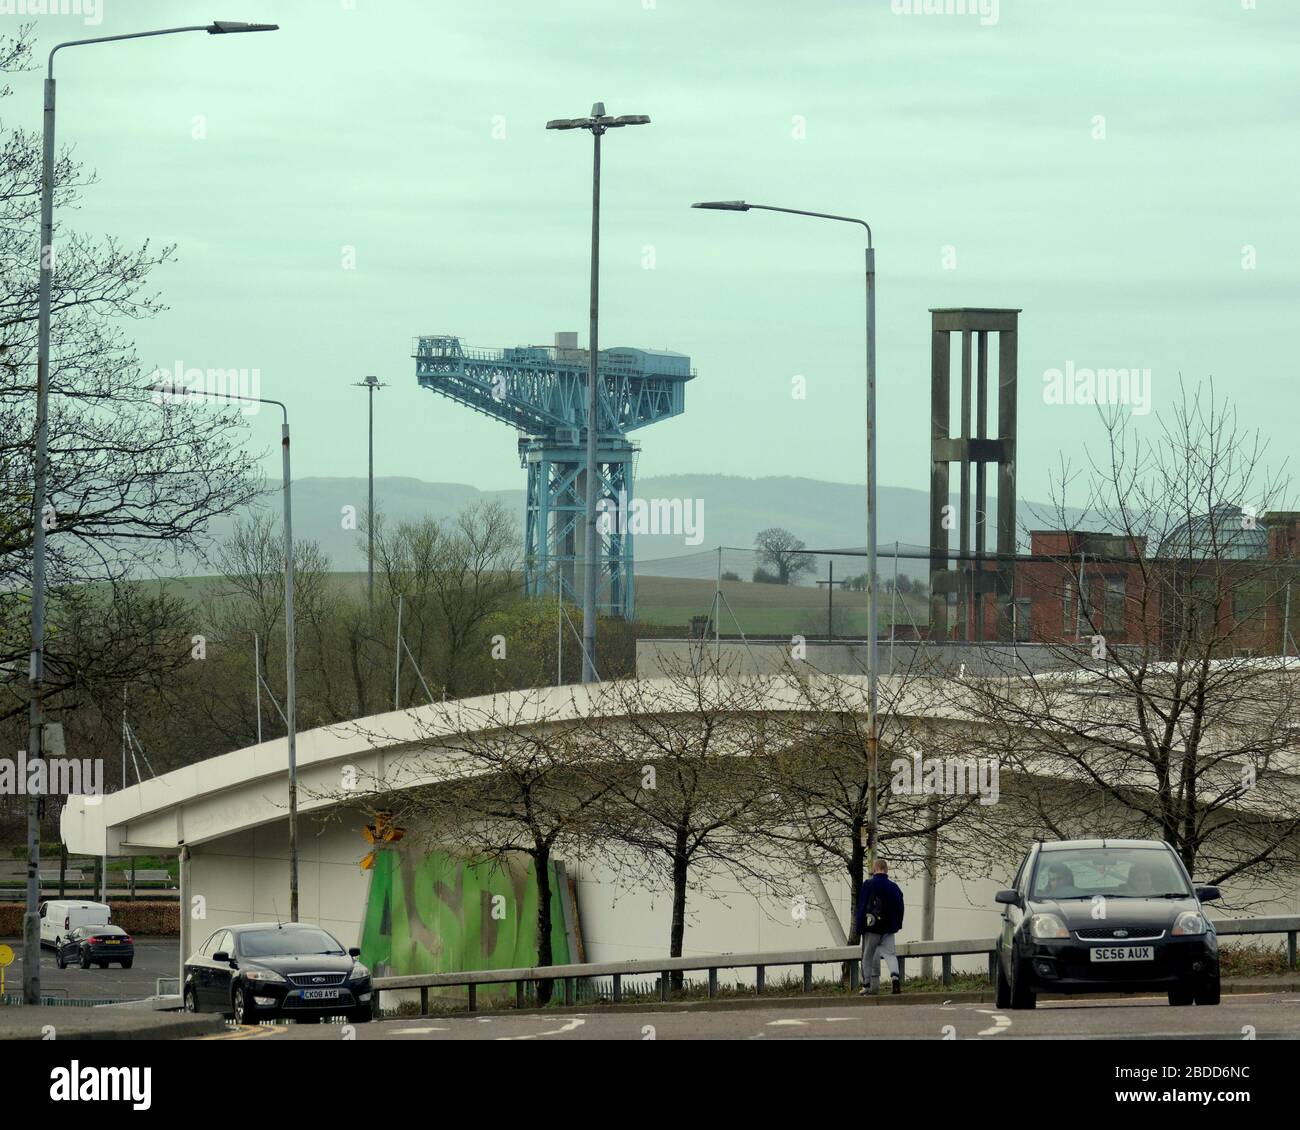 Glasgow, Scotland, UK, 8th April, 2020: Coronavirus saw deserted streets and Empty roads as people exercised on the Forth and Clyde canal.and the roundabout  road onin clydebank was not its usual end to end cars. Gerard Ferry/ Alamy Live News Stock Photo